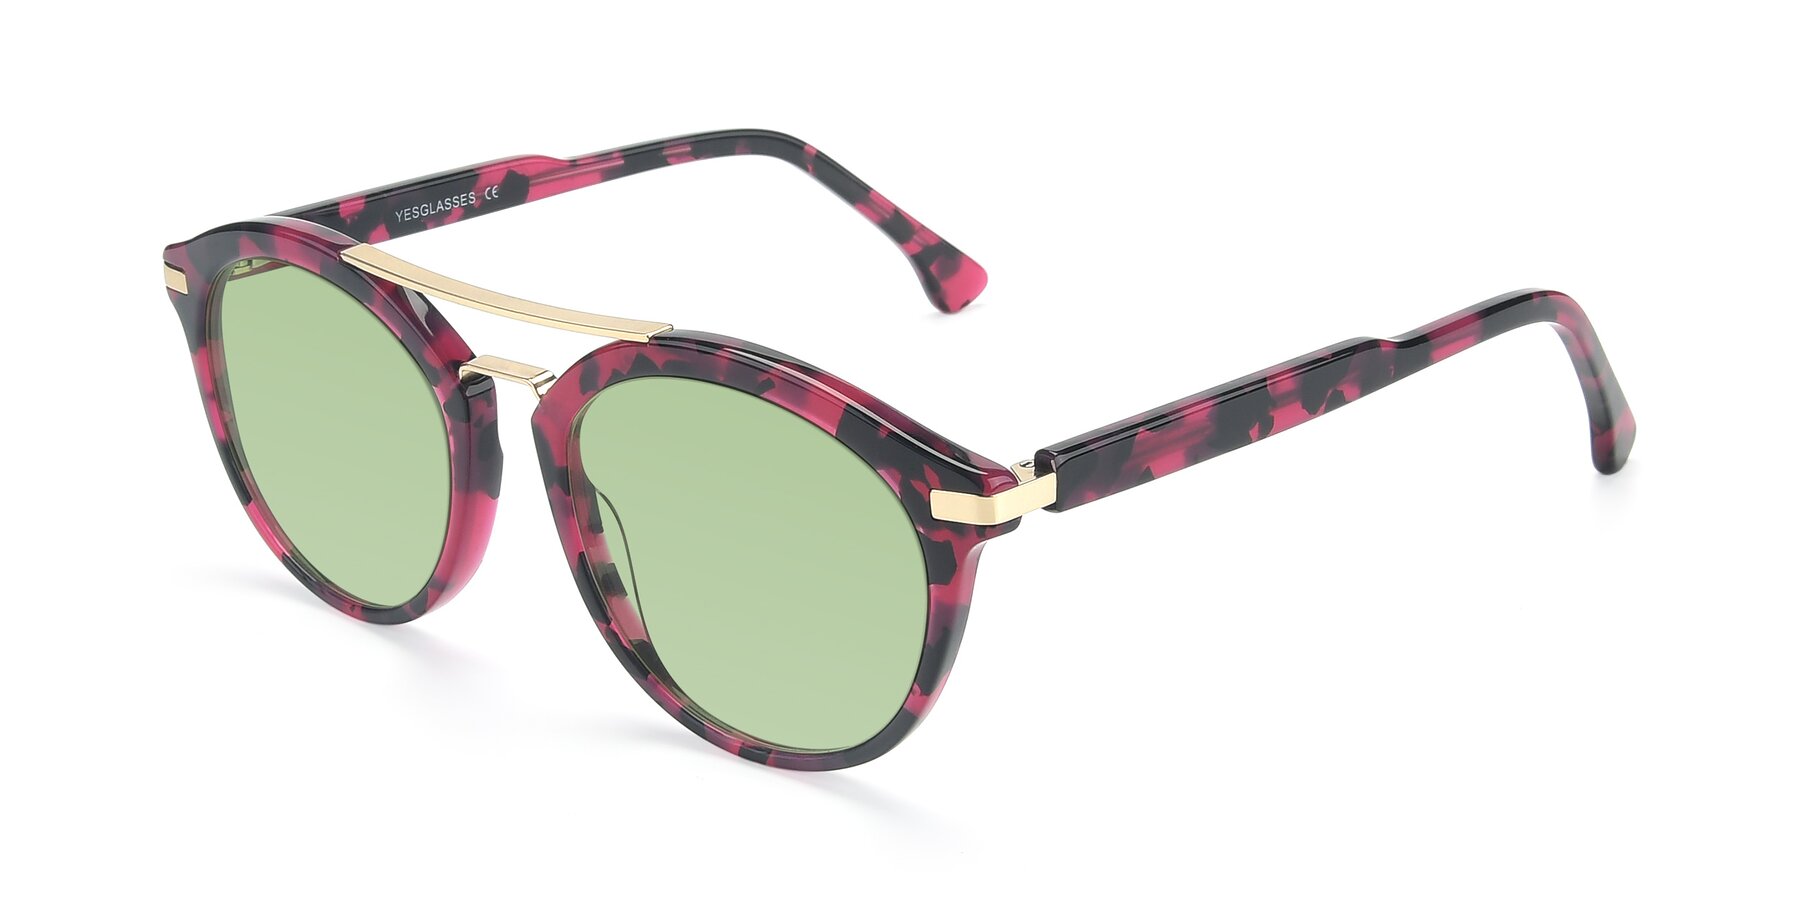 Angle of 17236 in Wine Tortoise with Medium Green Tinted Lenses